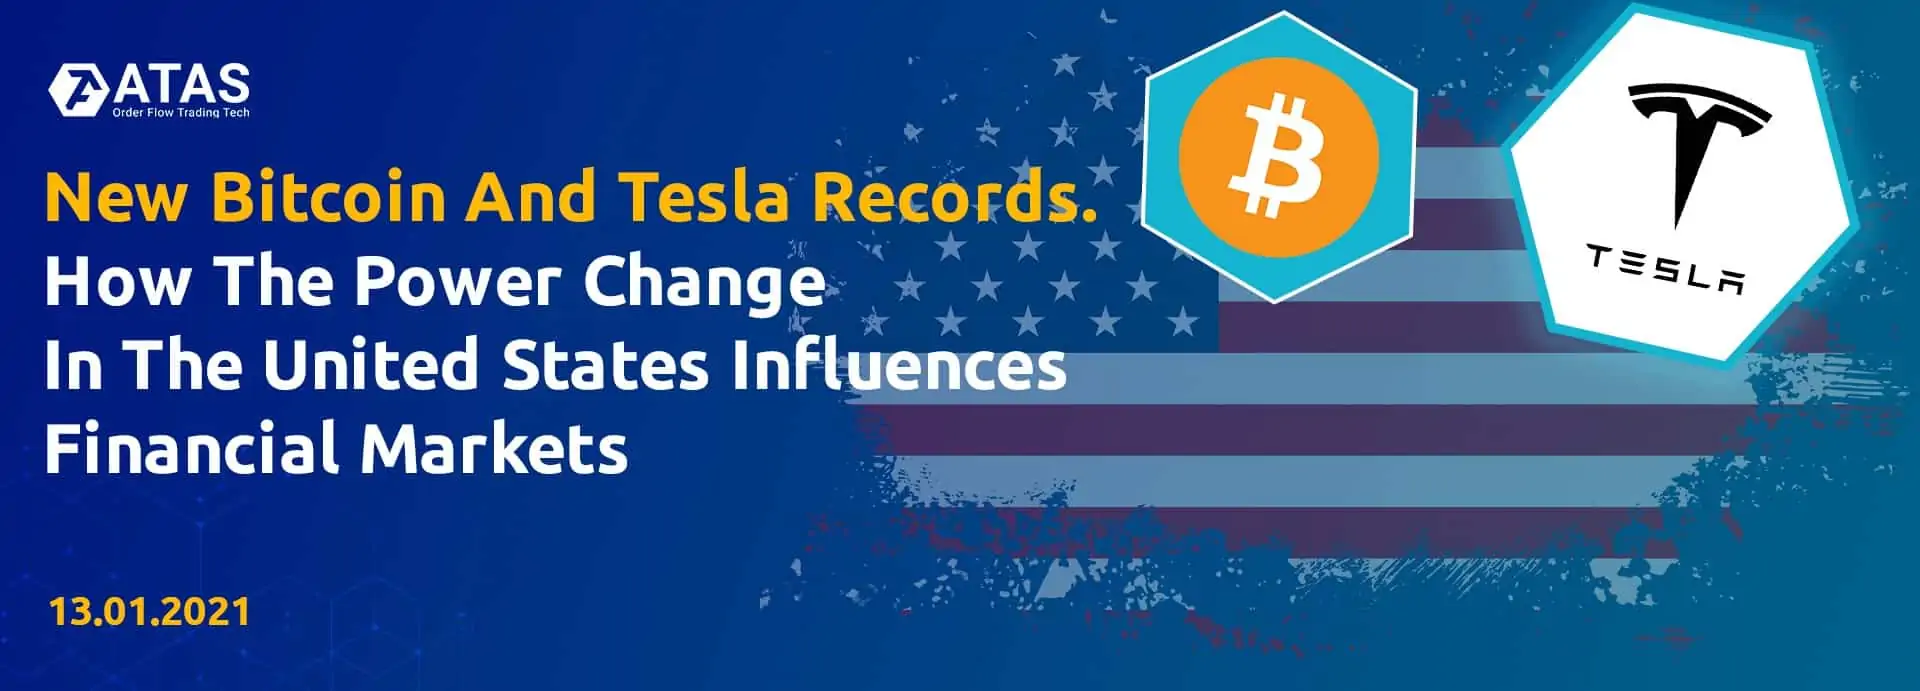 New Bitcoin And Tesla Records. How The Power Change In The United States Influences Financial Markets